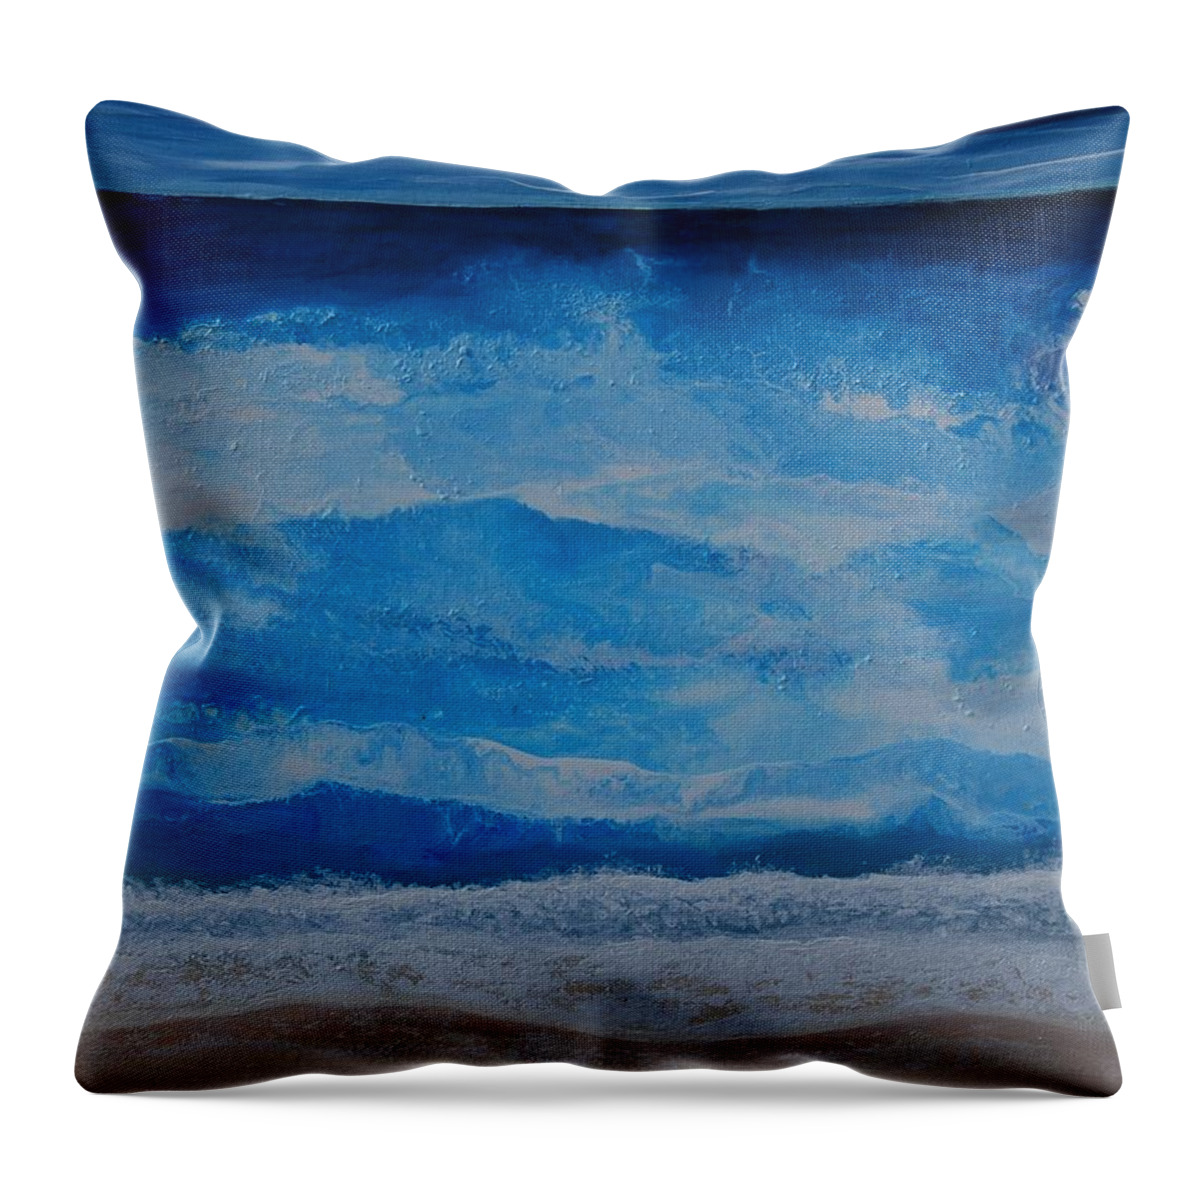 Indigo Throw Pillow featuring the painting Waves by Linda Bailey